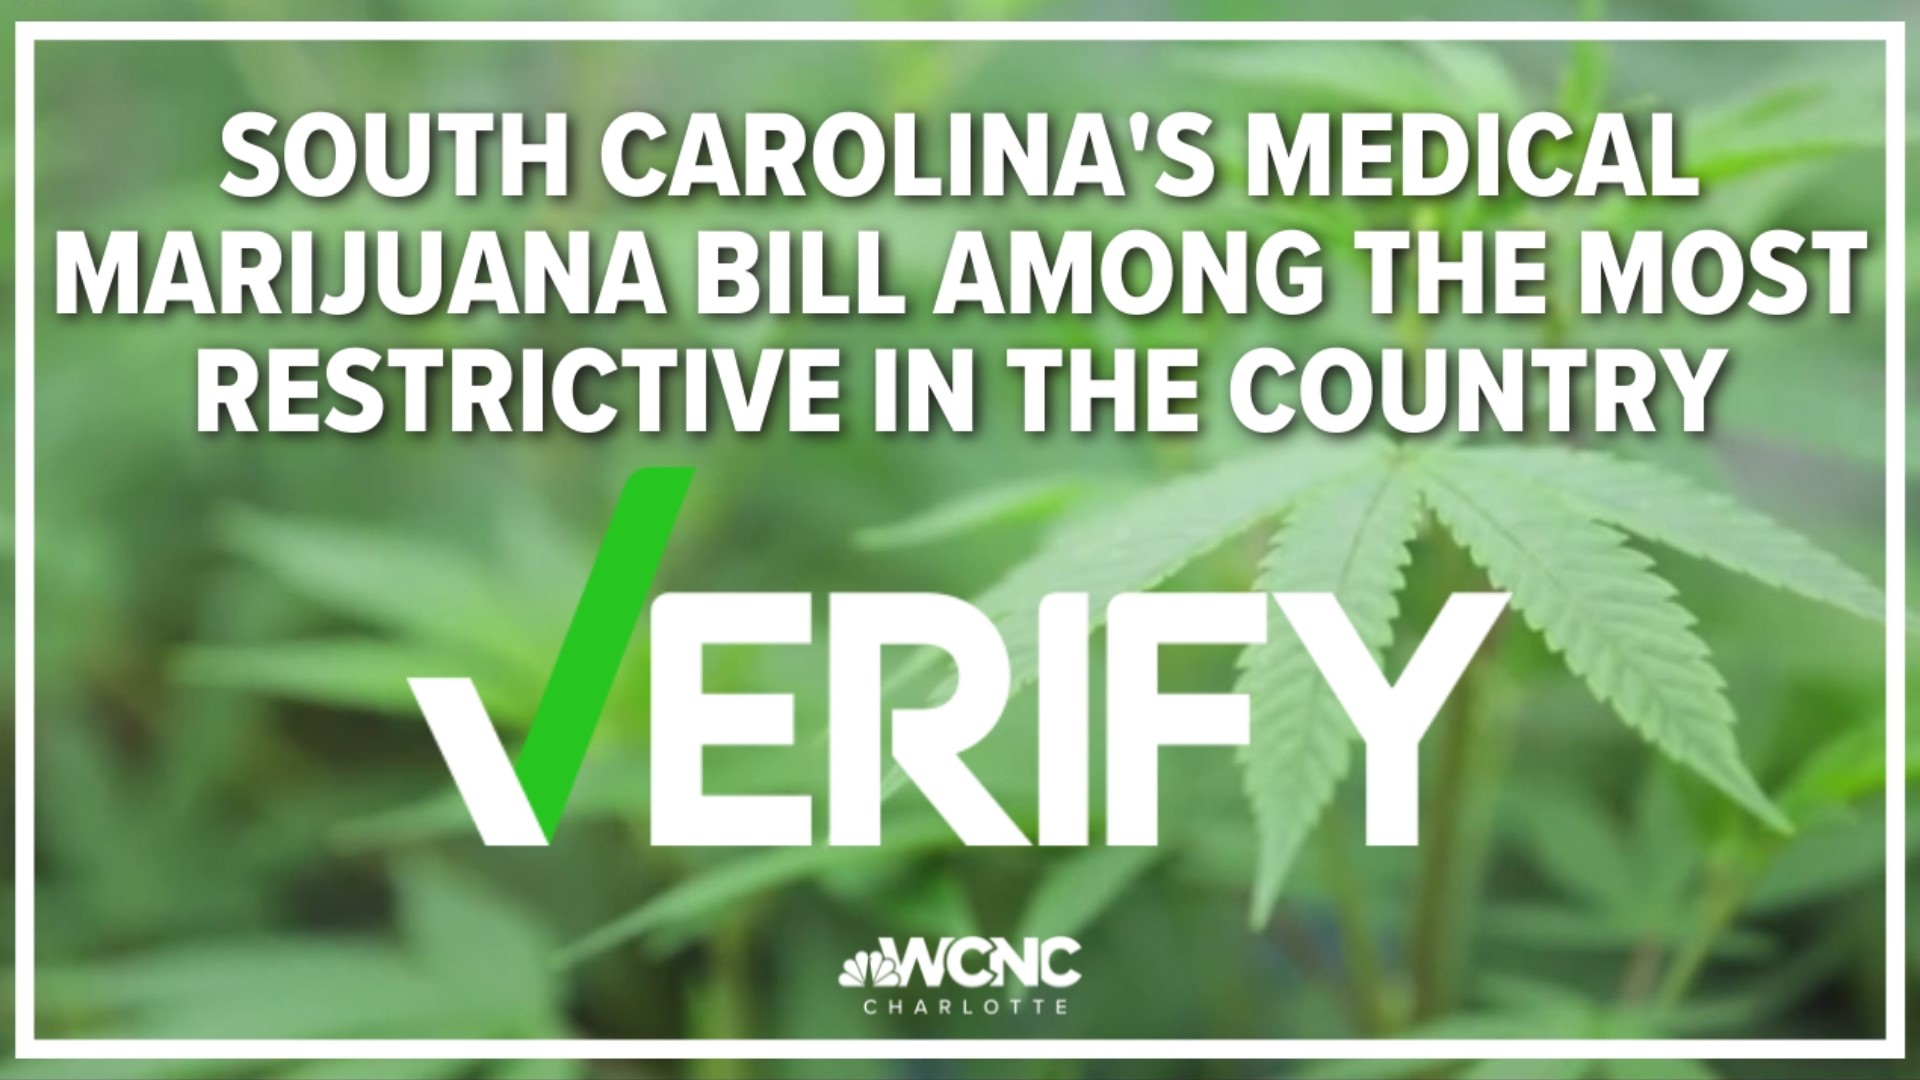 South Carolina lawmakers are inching closer to legalizing medical marijuana. The Palmetto state would become the 38th state to do so.